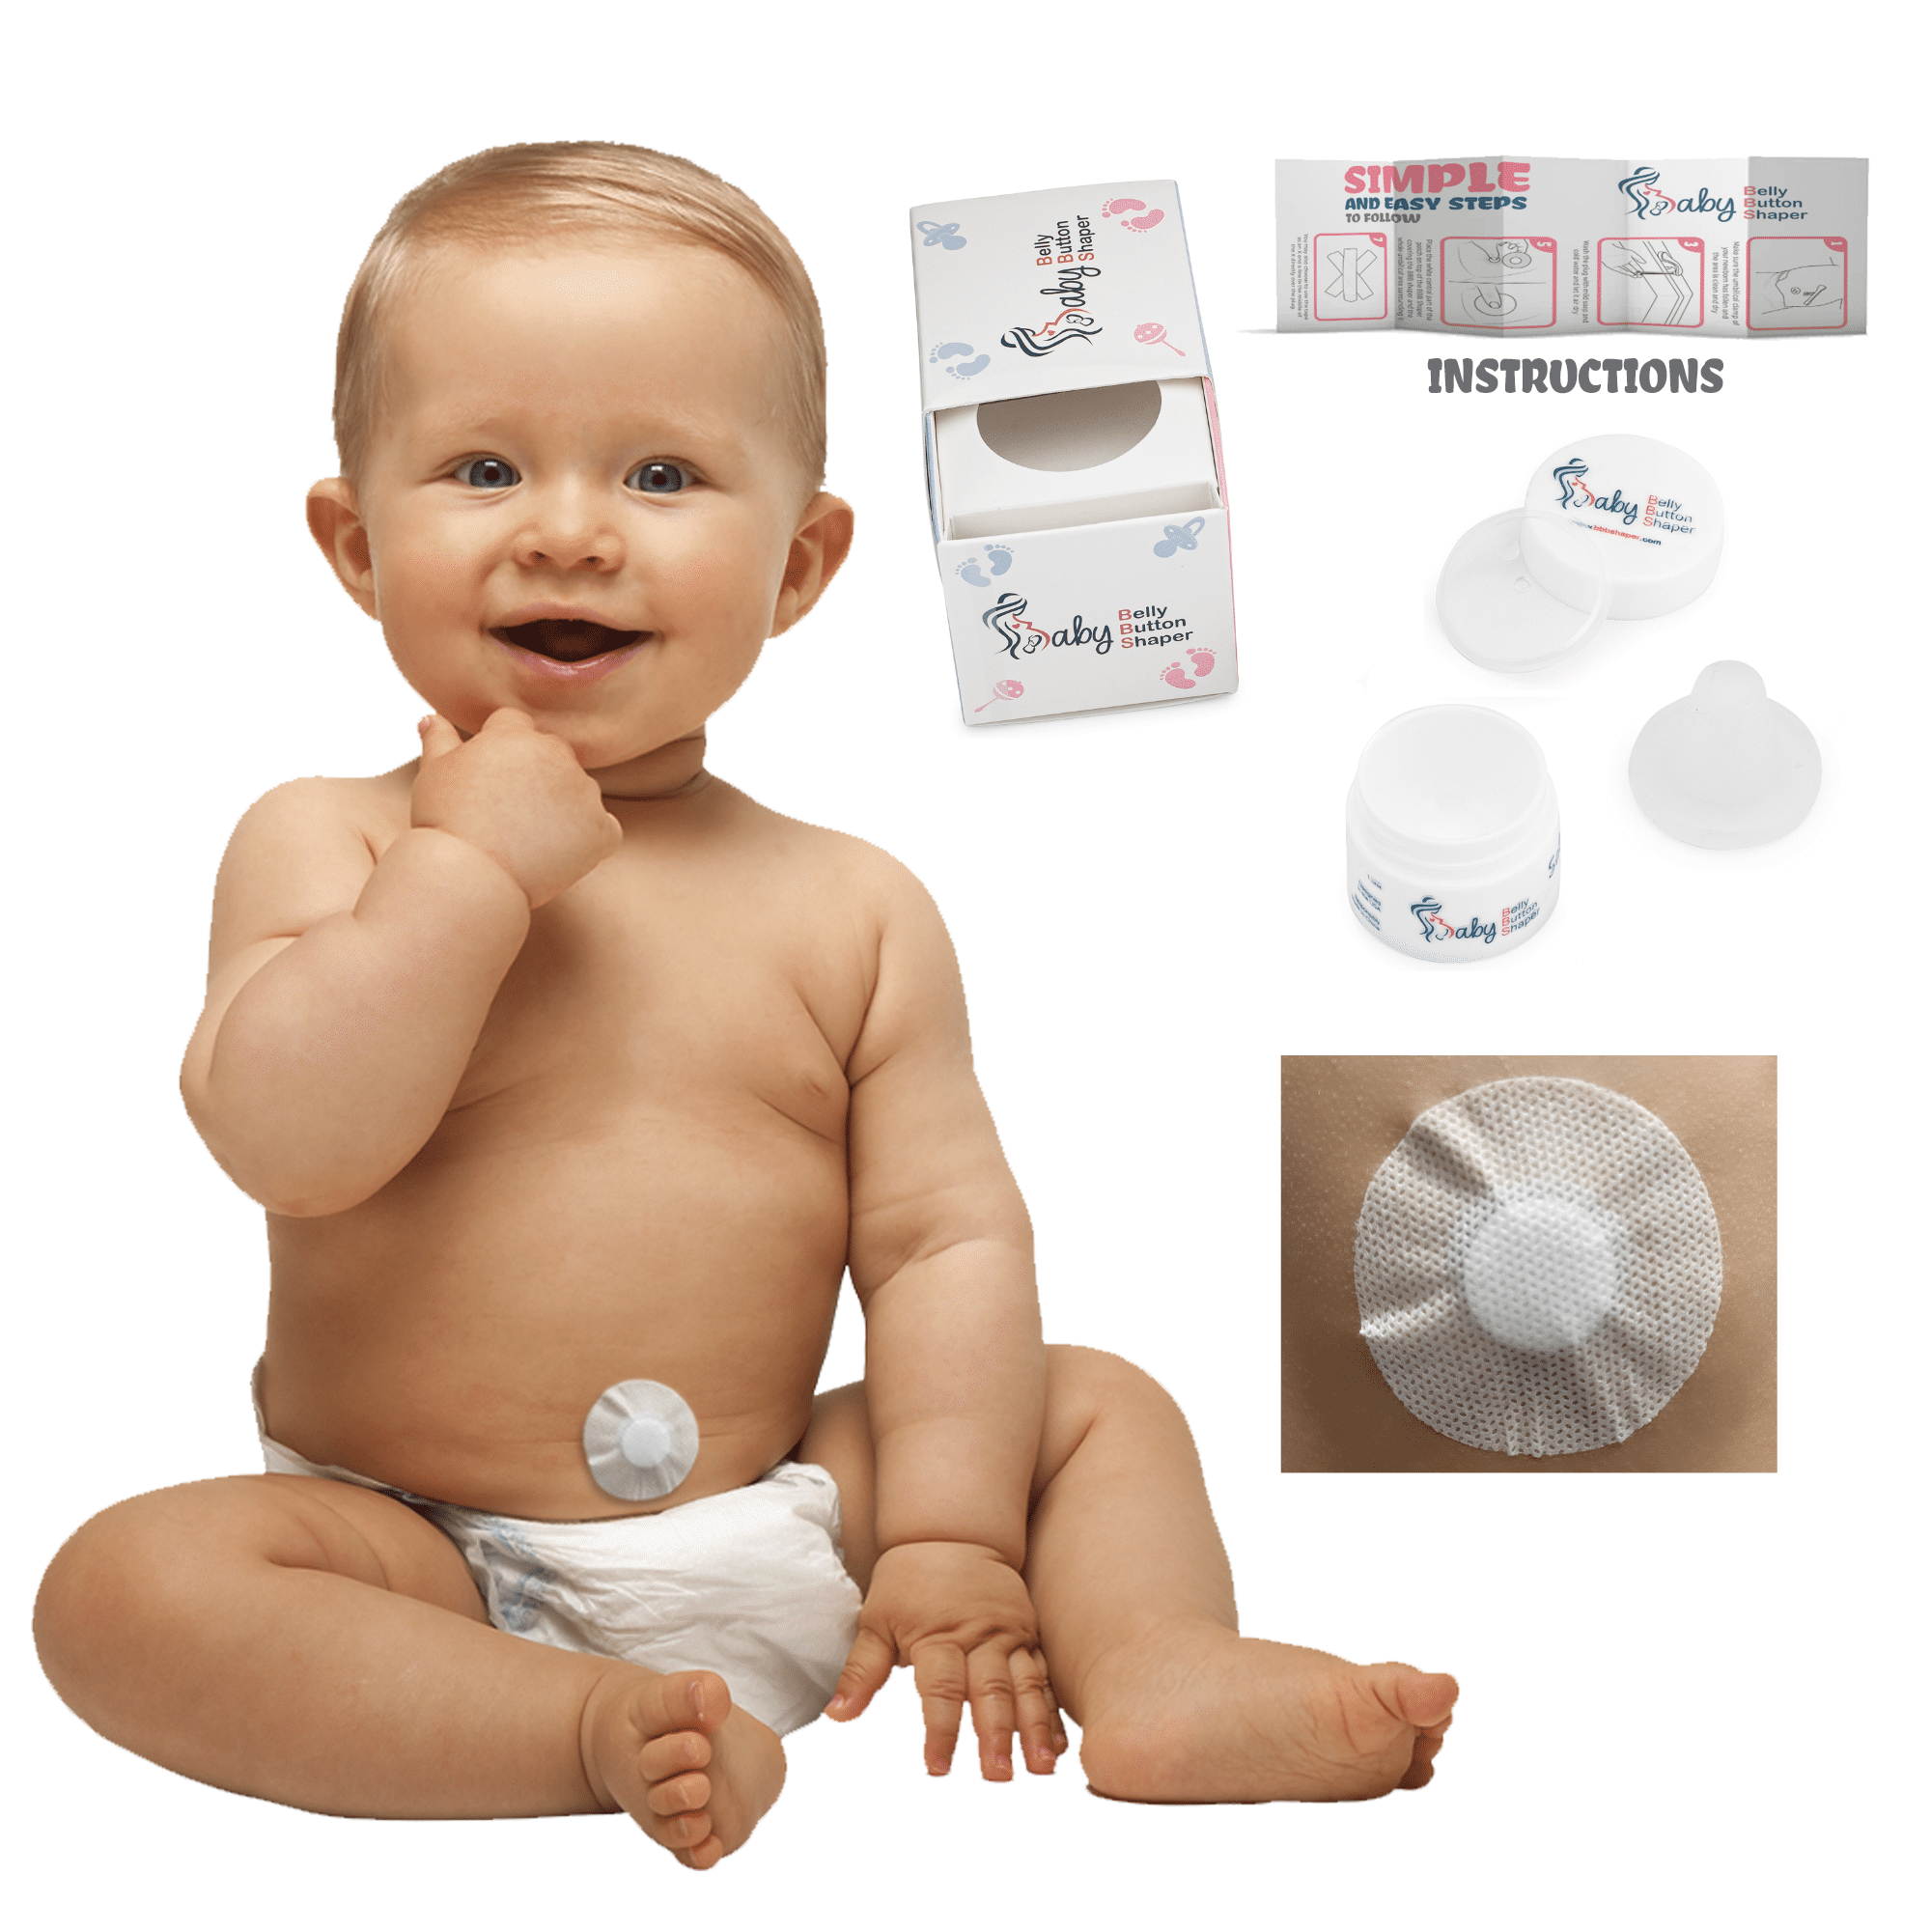 Baby Belly Button Shaper Plugbaby Umbilical Hernia Beltbaby Belly